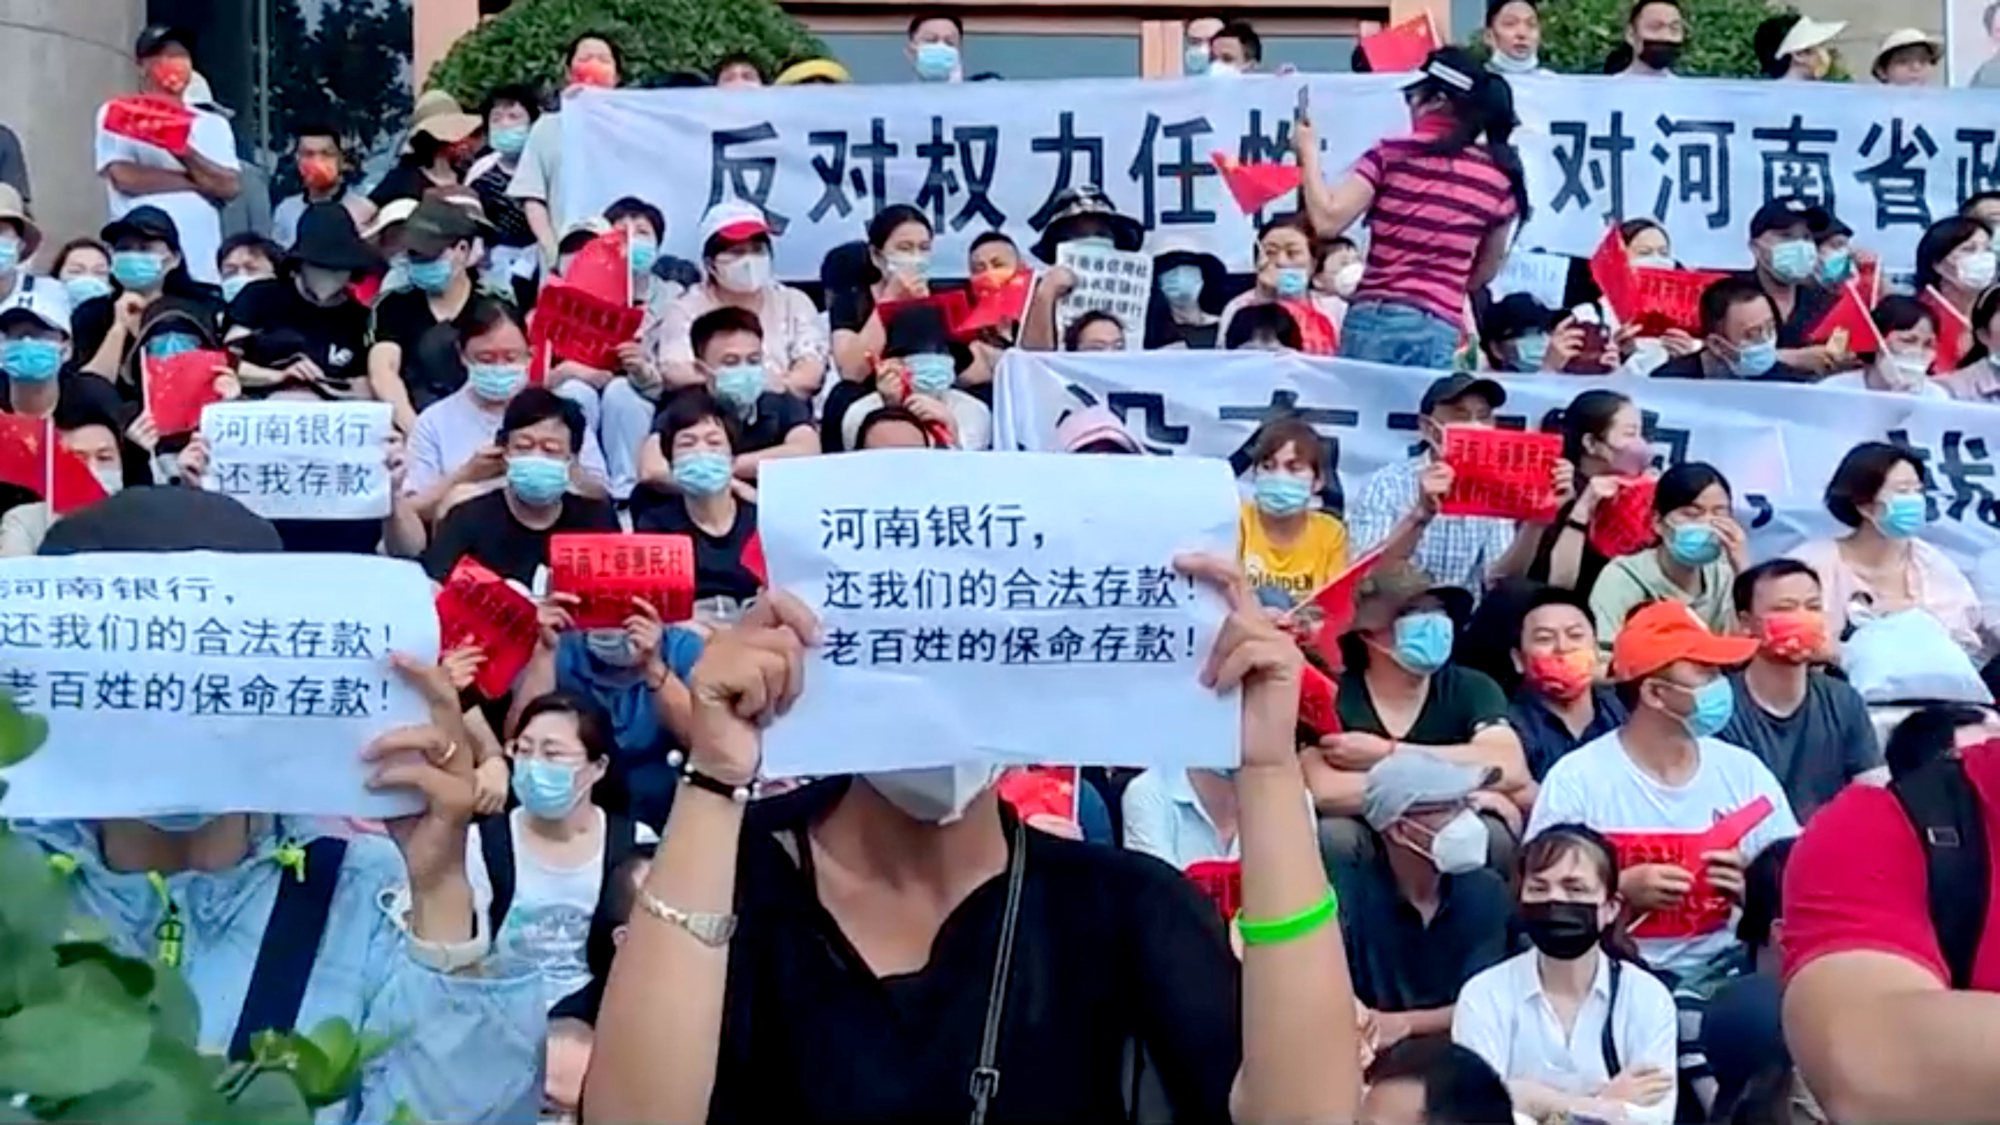 An estimated 1,000 protesters held up signs during a protest at the provincial branch of the People’s Bank of China (PBOC) in Zhengzhou on July 10, 2022, in this screengrab from video obtained by Reuters. Photo: Reuters